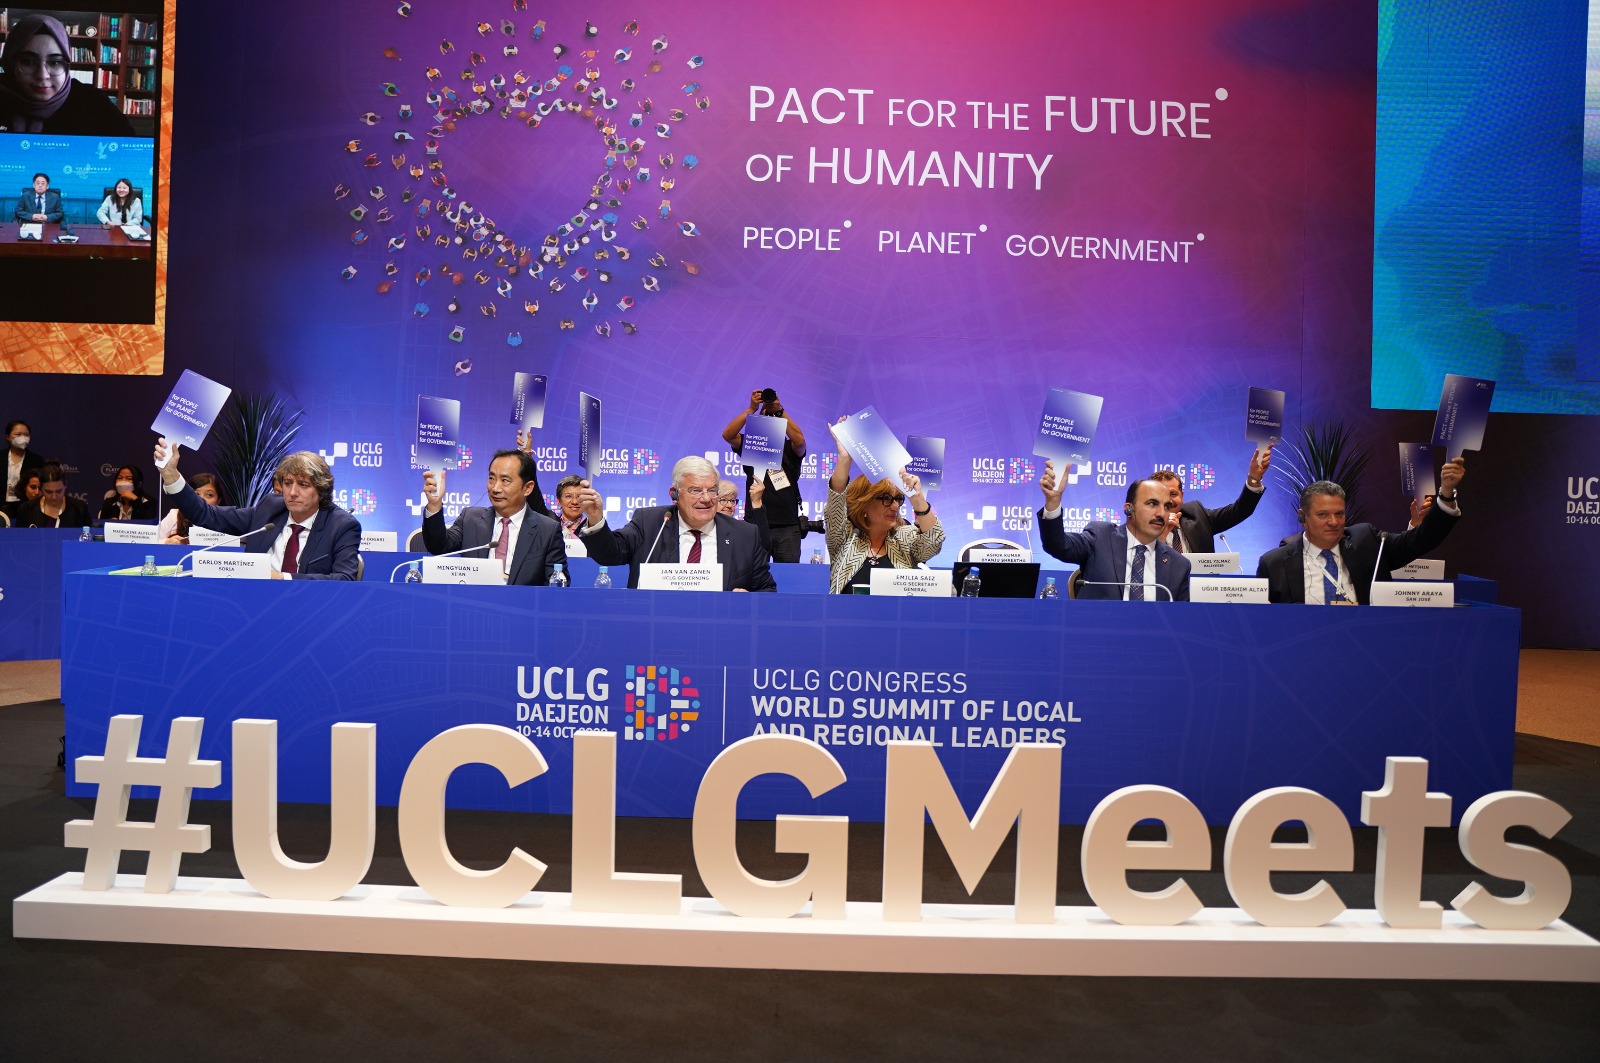 UCLG Congress adopts the Pact for the Future: Towards The UN Summit of the Future and the SDG Summit